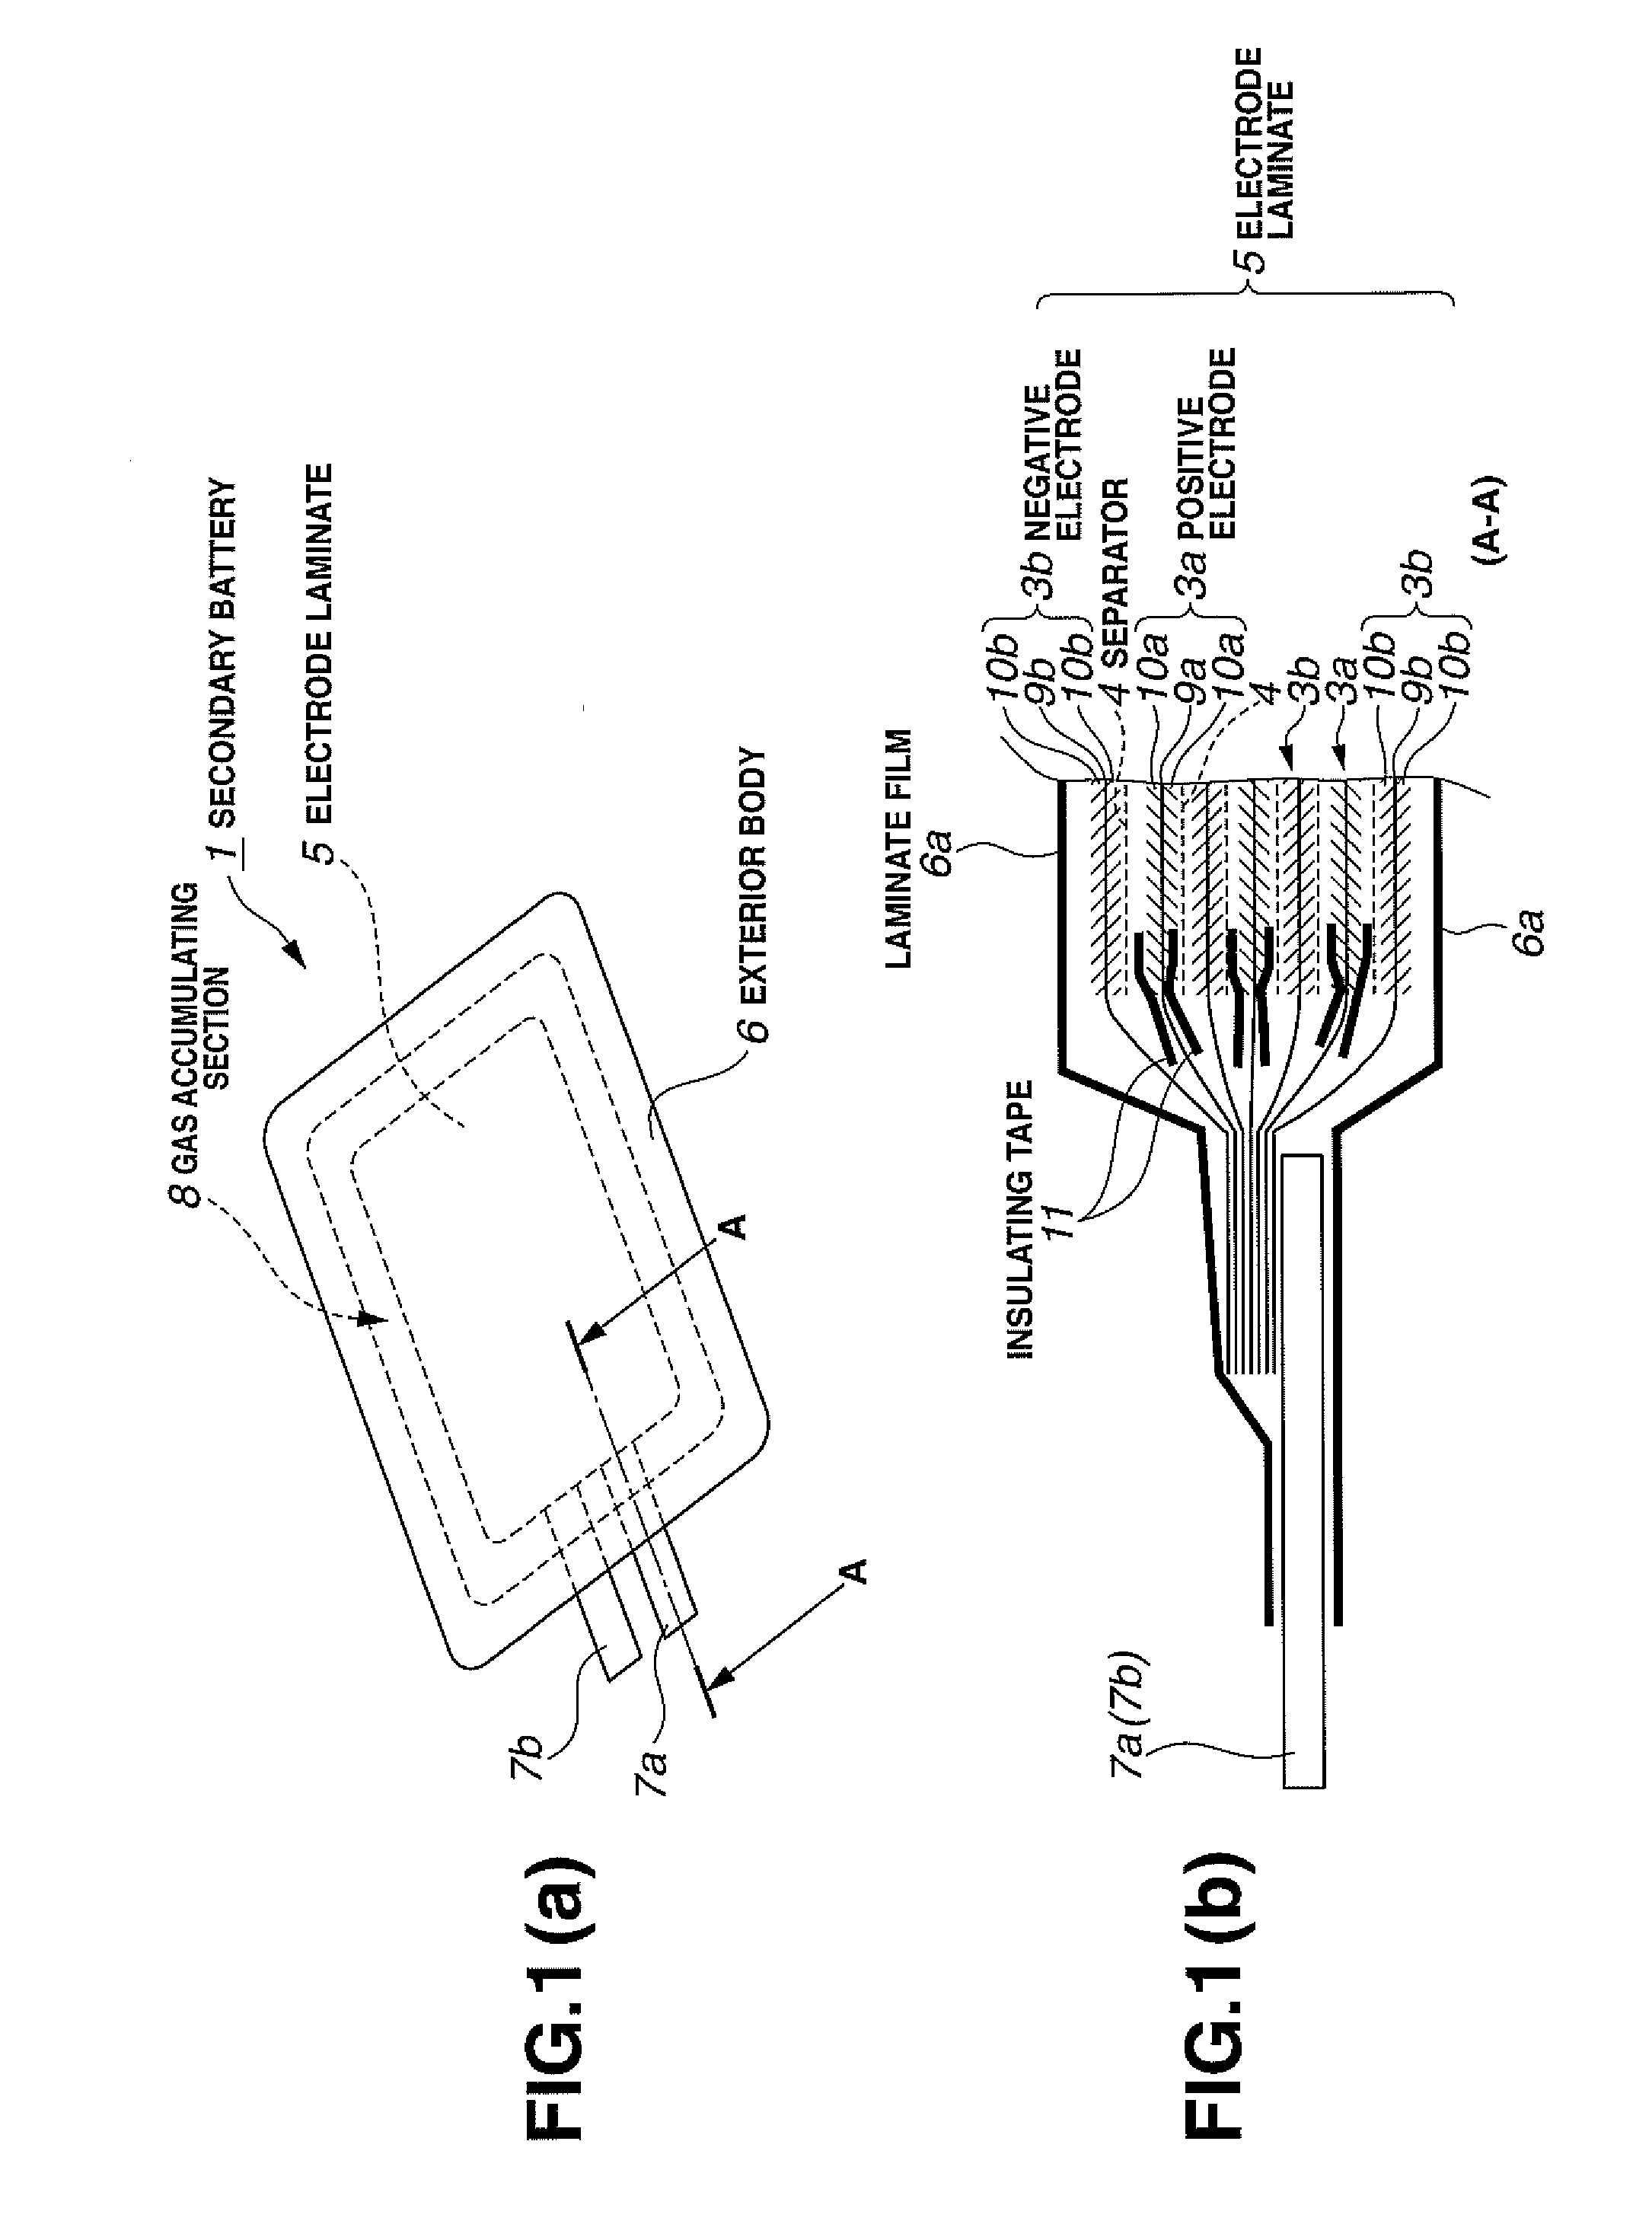 Production method for non-aqueous electrolyte secondary battery